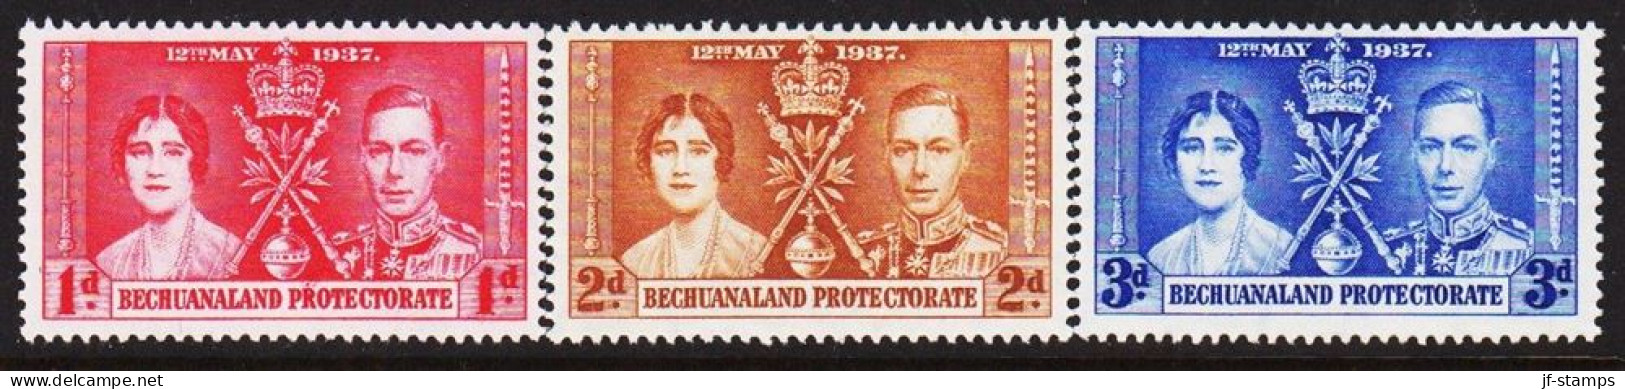 1937. BECHUANALAND. Georg VI Coronation Complete Set Very Lightly Hinged.  (MICHEL 98-100) - JF542499 - 1885-1964 Bechuanaland Protectorate